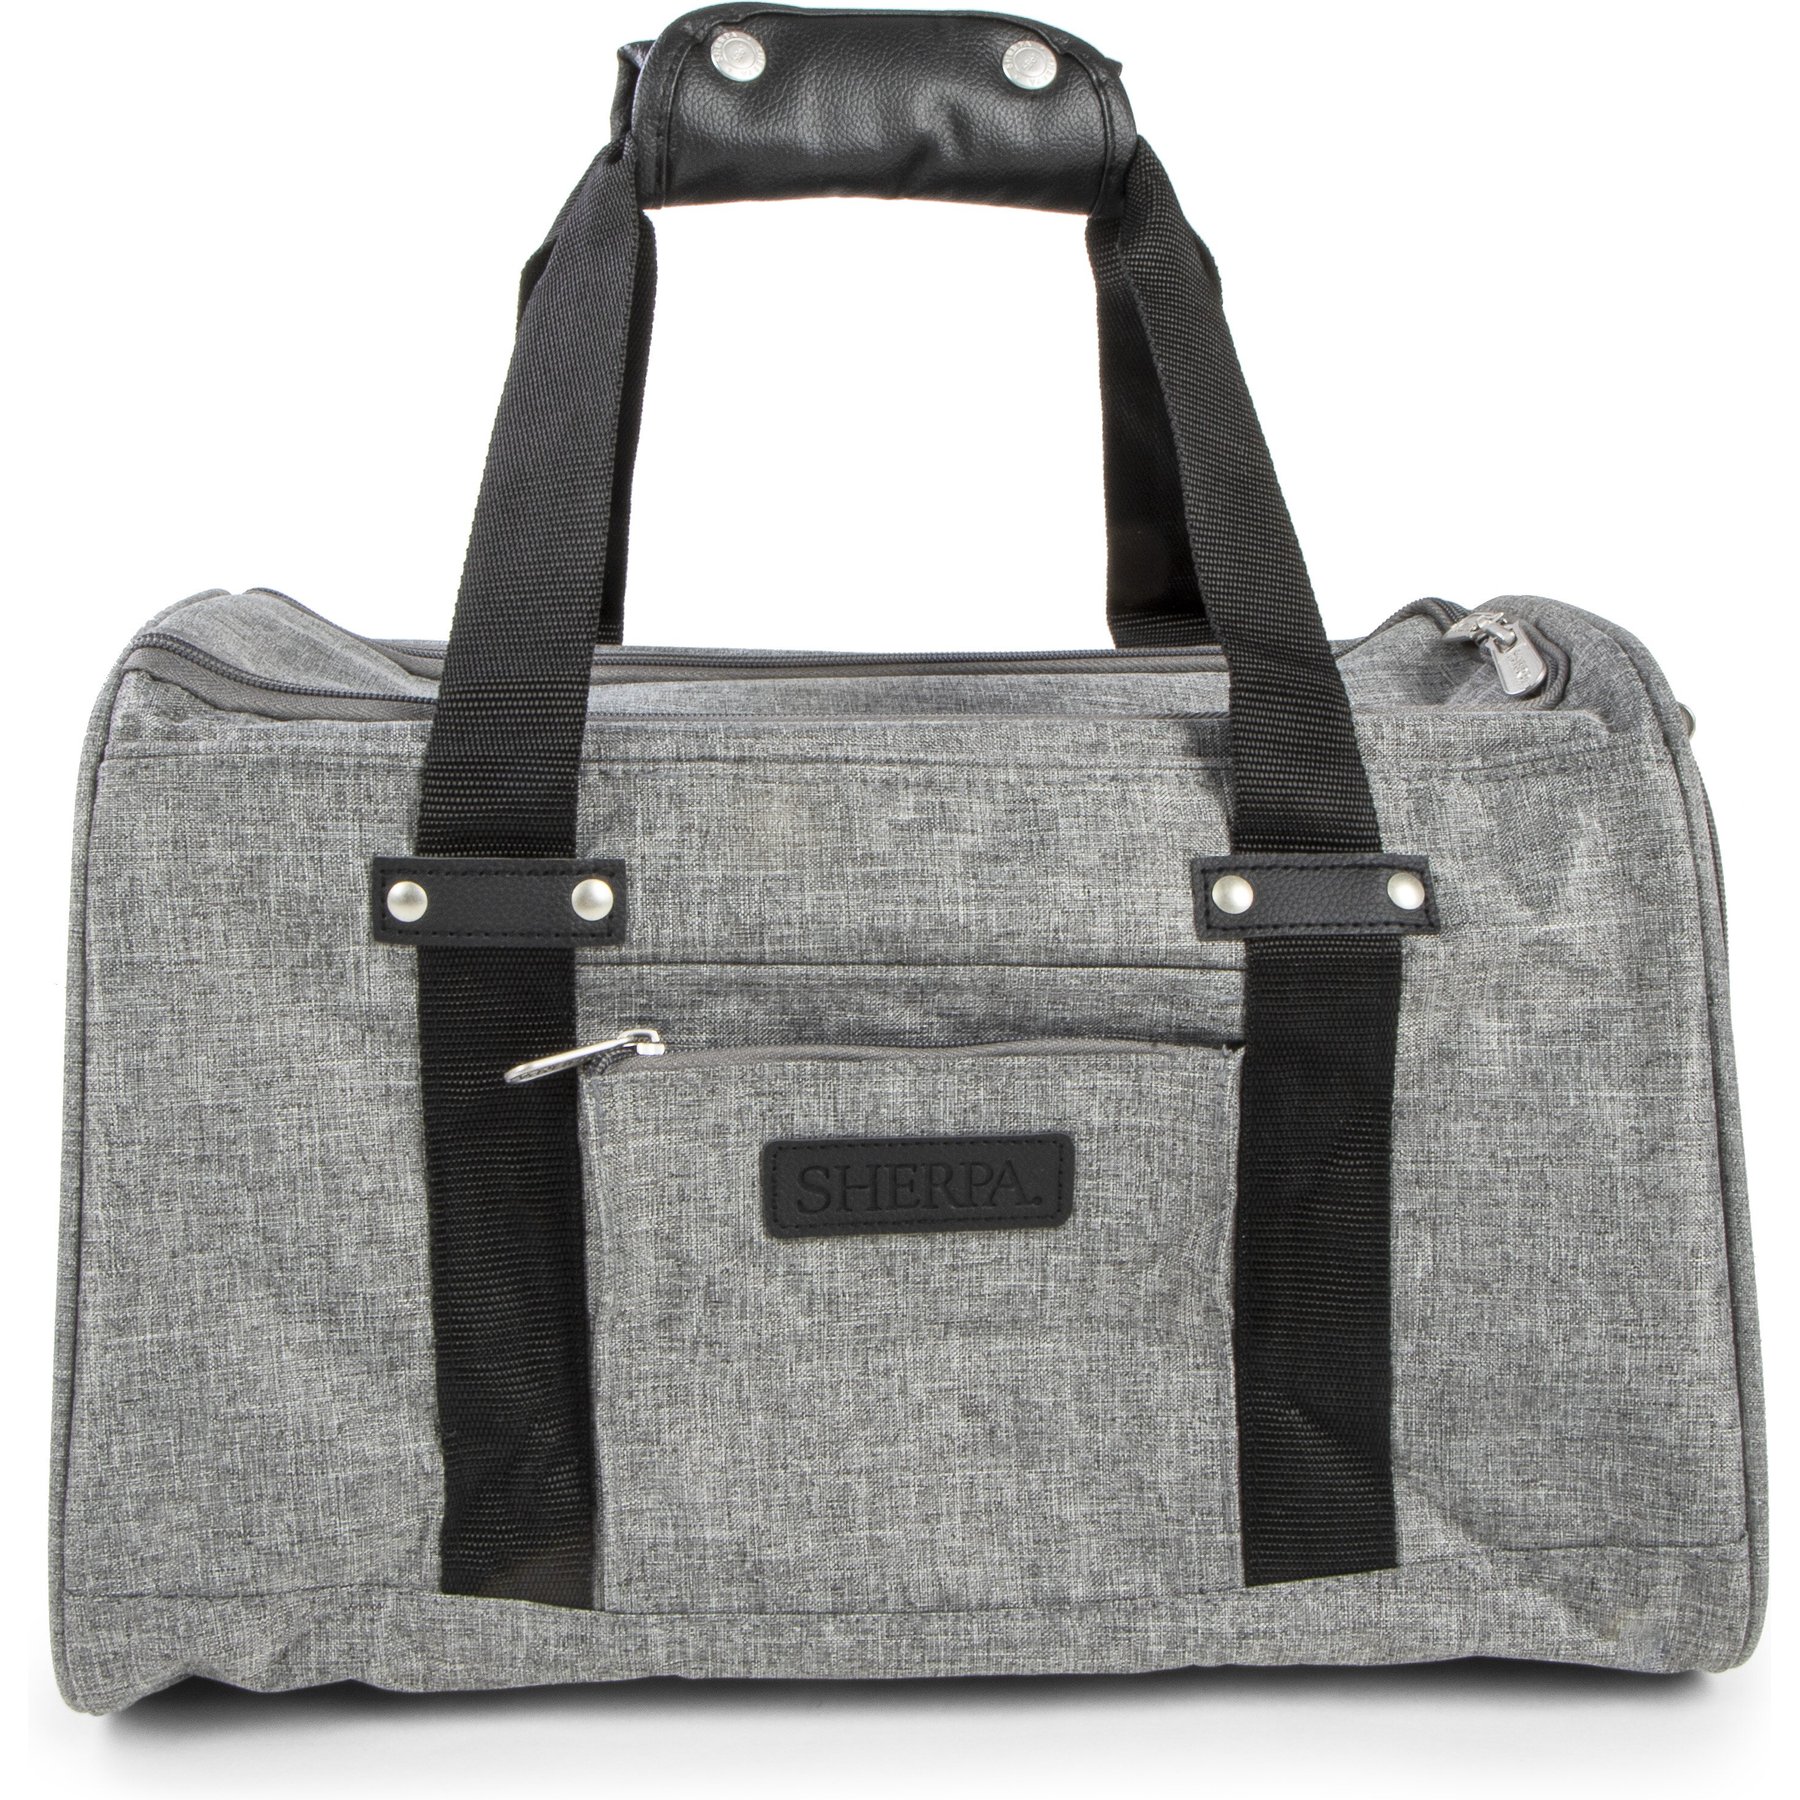 Sherpa Original Deluxe Travel Pet Carrier, Airline Approved & Guaranteed On  Board - Charcoal Gray, Medium